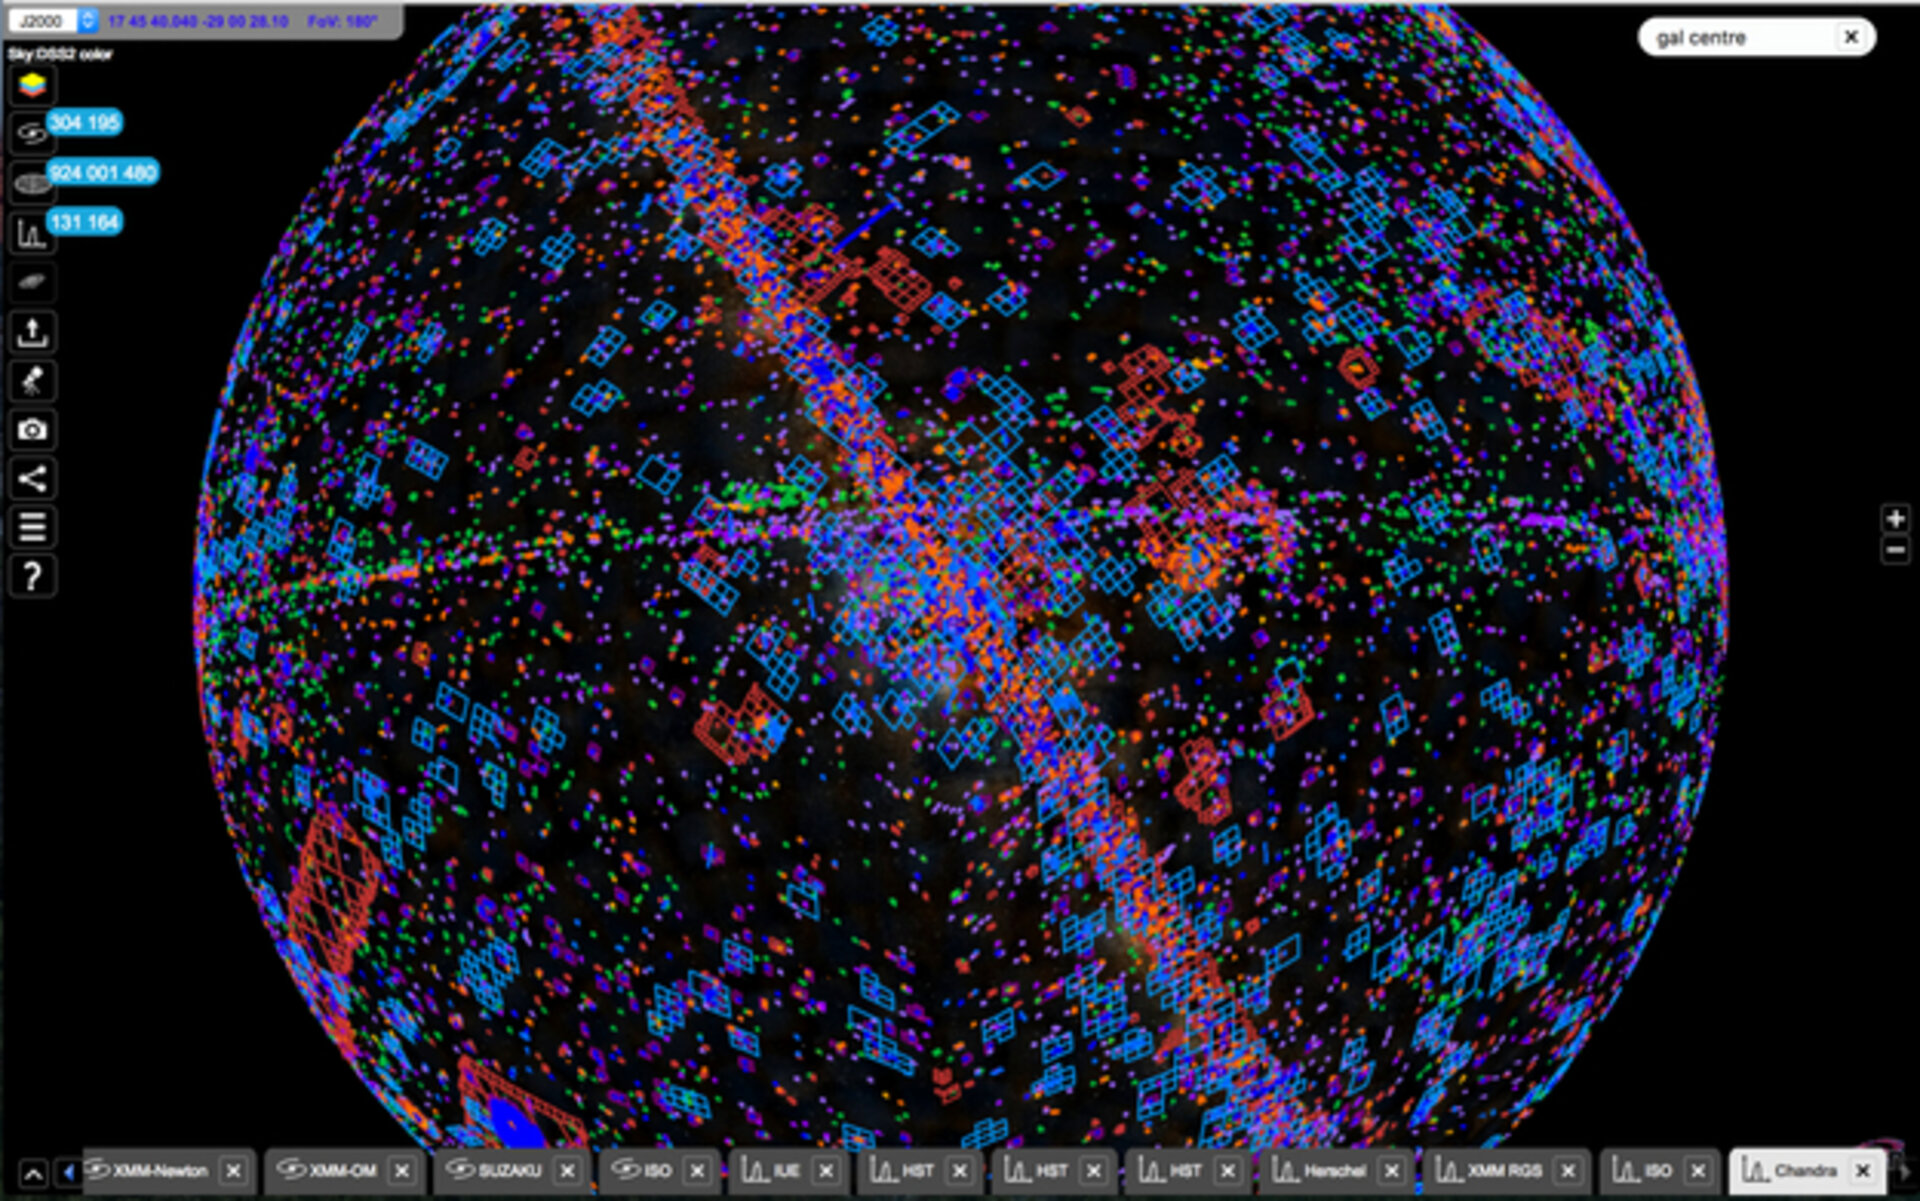 All-sky view of the content of ESASky, ESA's interactive portal to access astronomical data from space science missions.